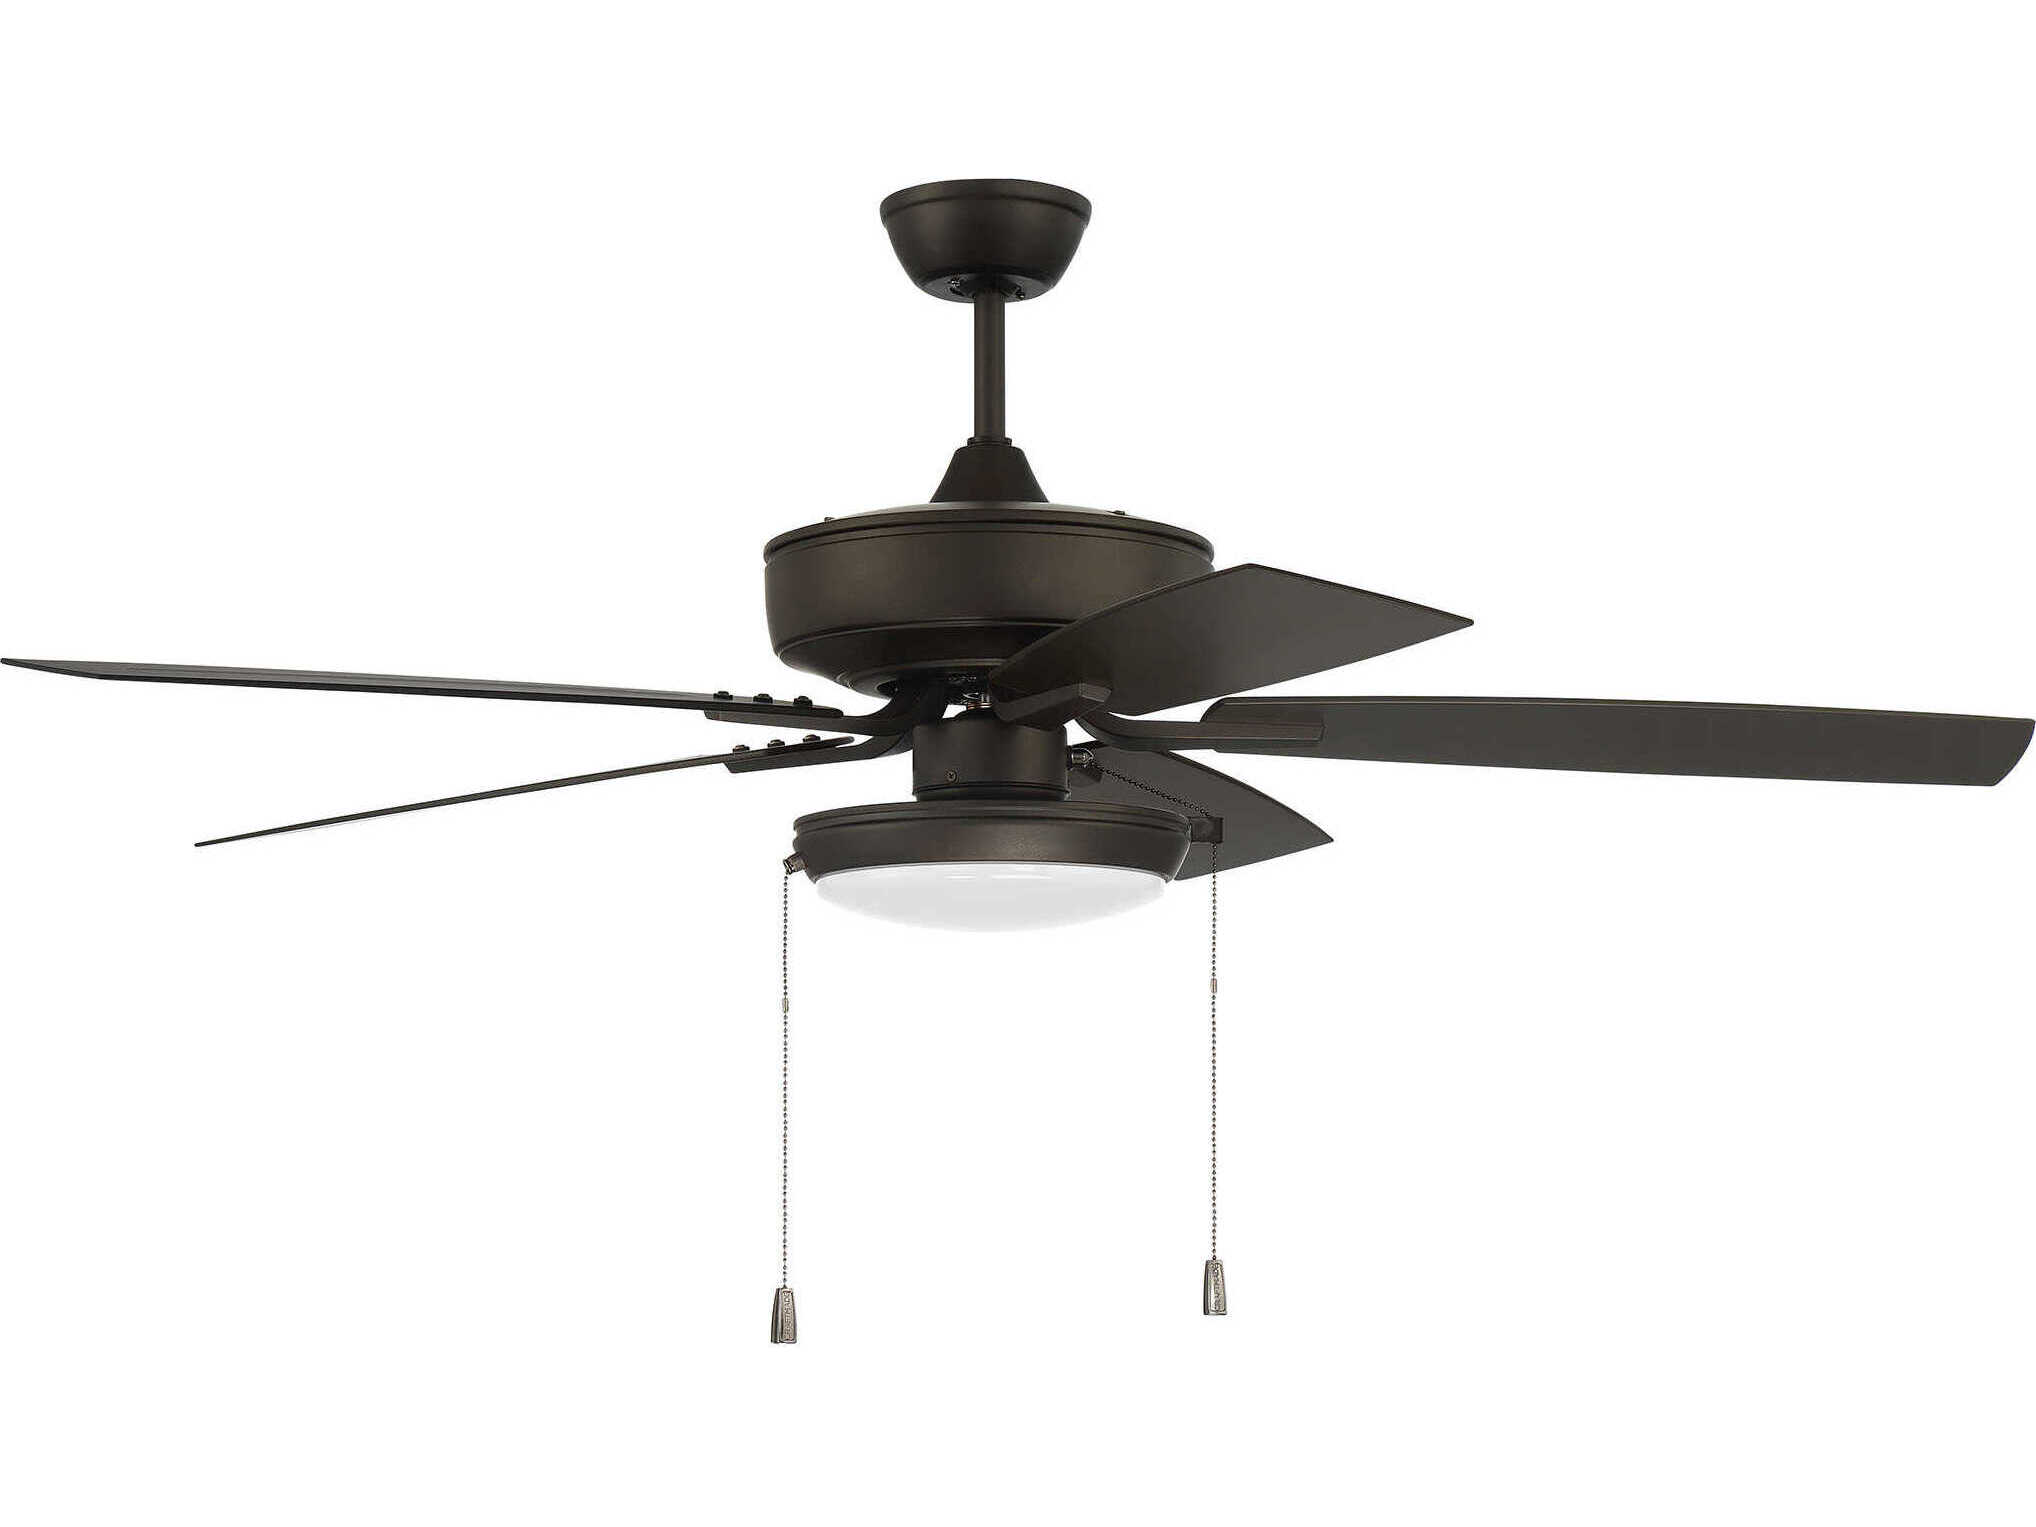 Craftmade Pro Plus 1 - Light 52'' LED Outdoor Ceiling Fan